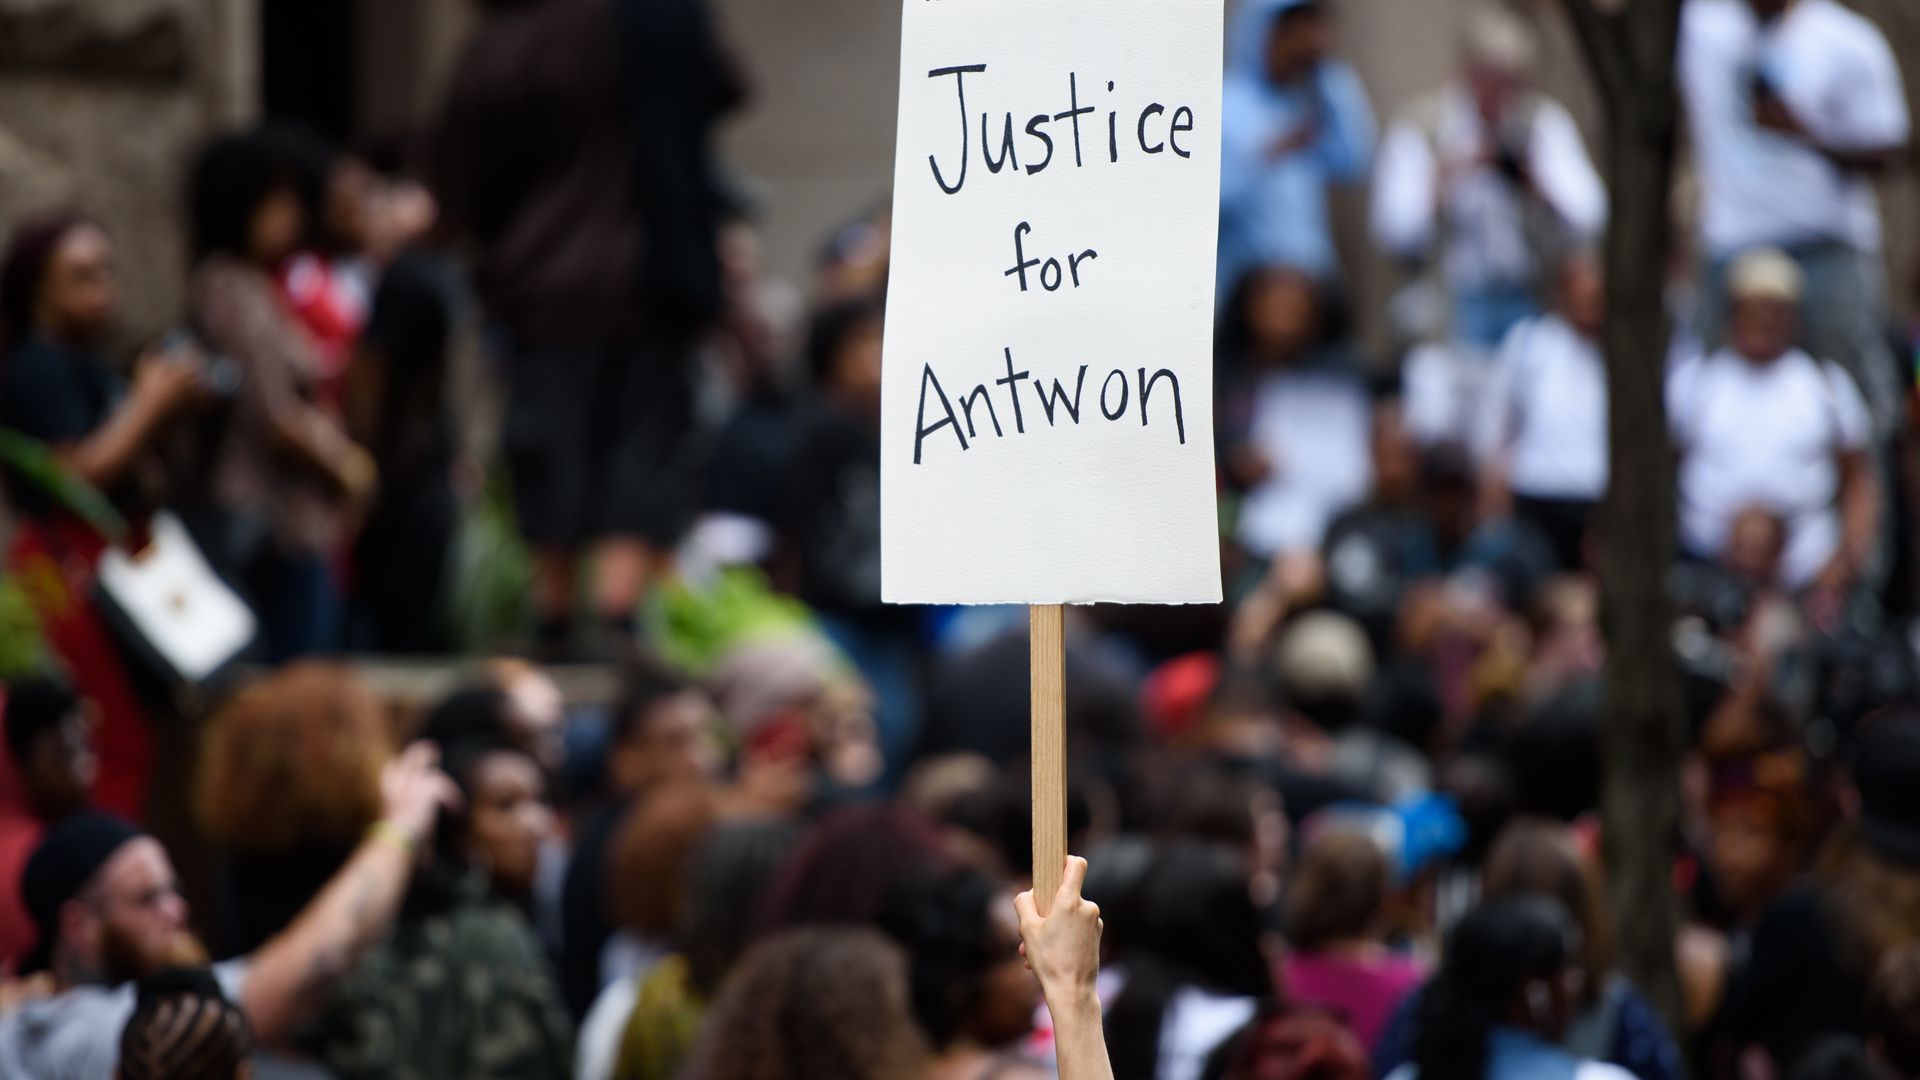 Protestors gather, holding a sign "Justice for Antwon"